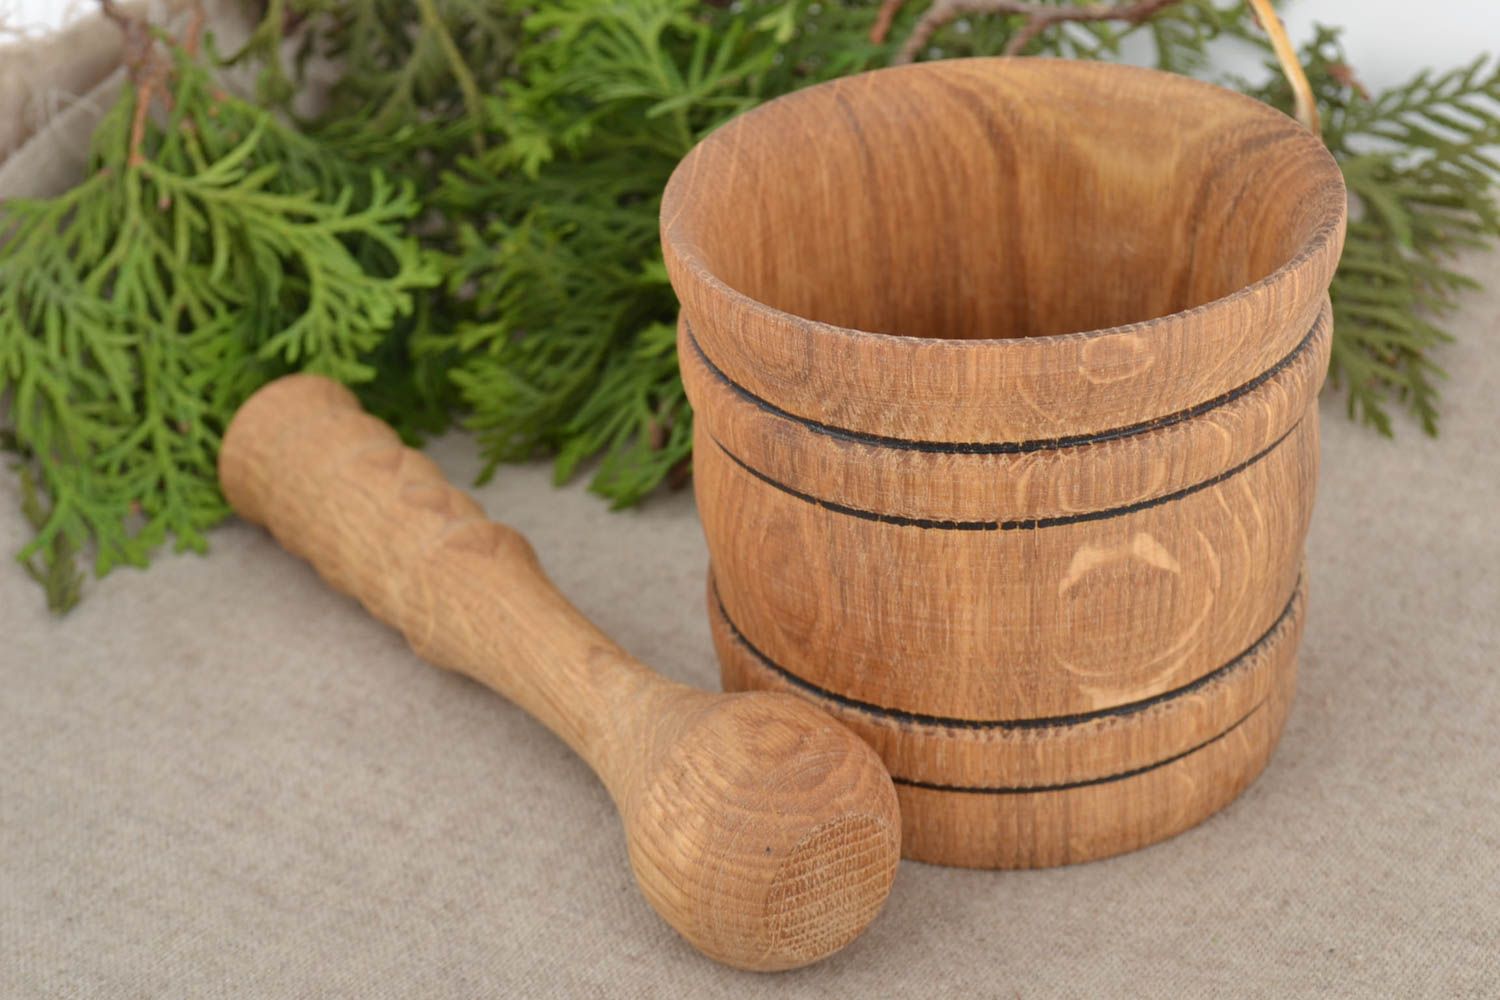 Handmade eco friendly wooden mortar and pestle for spices grinding 350 ml photo 1